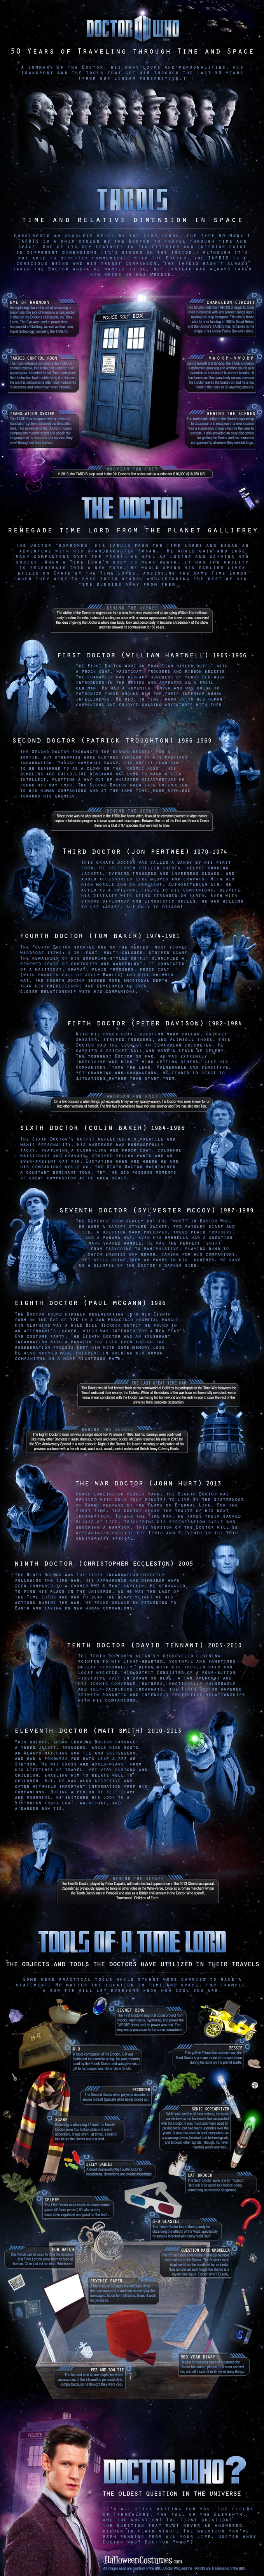 DOCTOT WHO 50th Anniversary Costume Infographic 